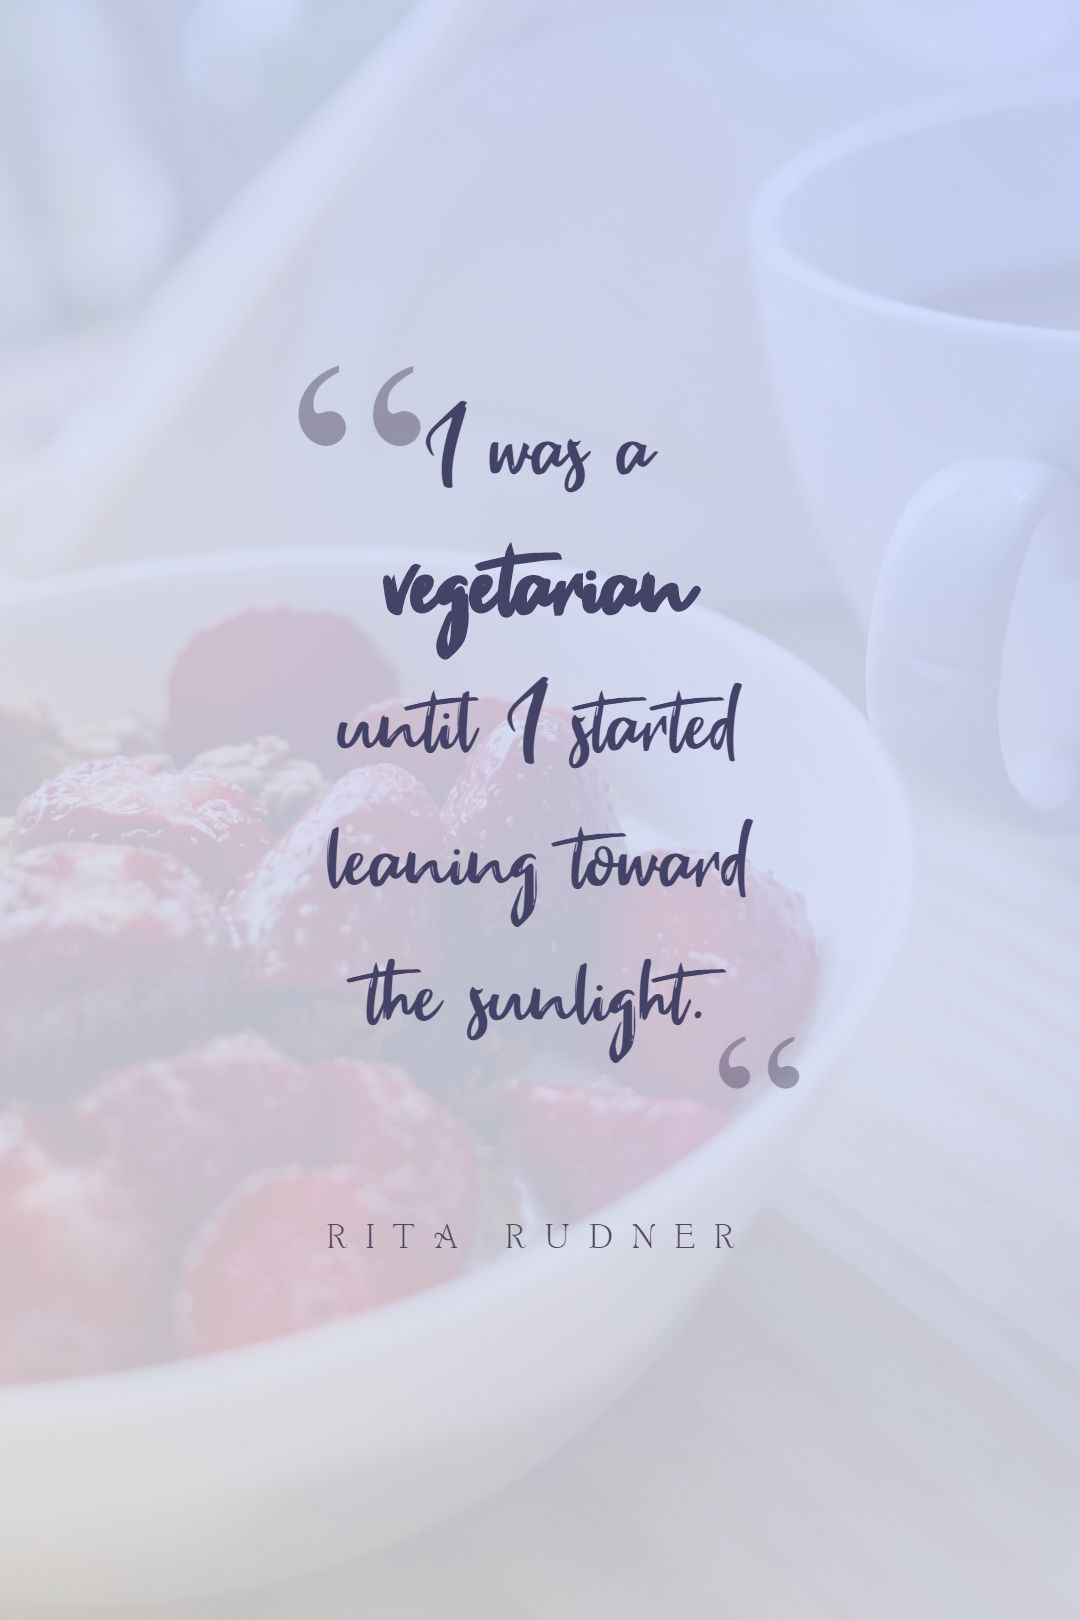 Rita Rudner ‘s quote about food,vegetarian. I was a vegetarian until…